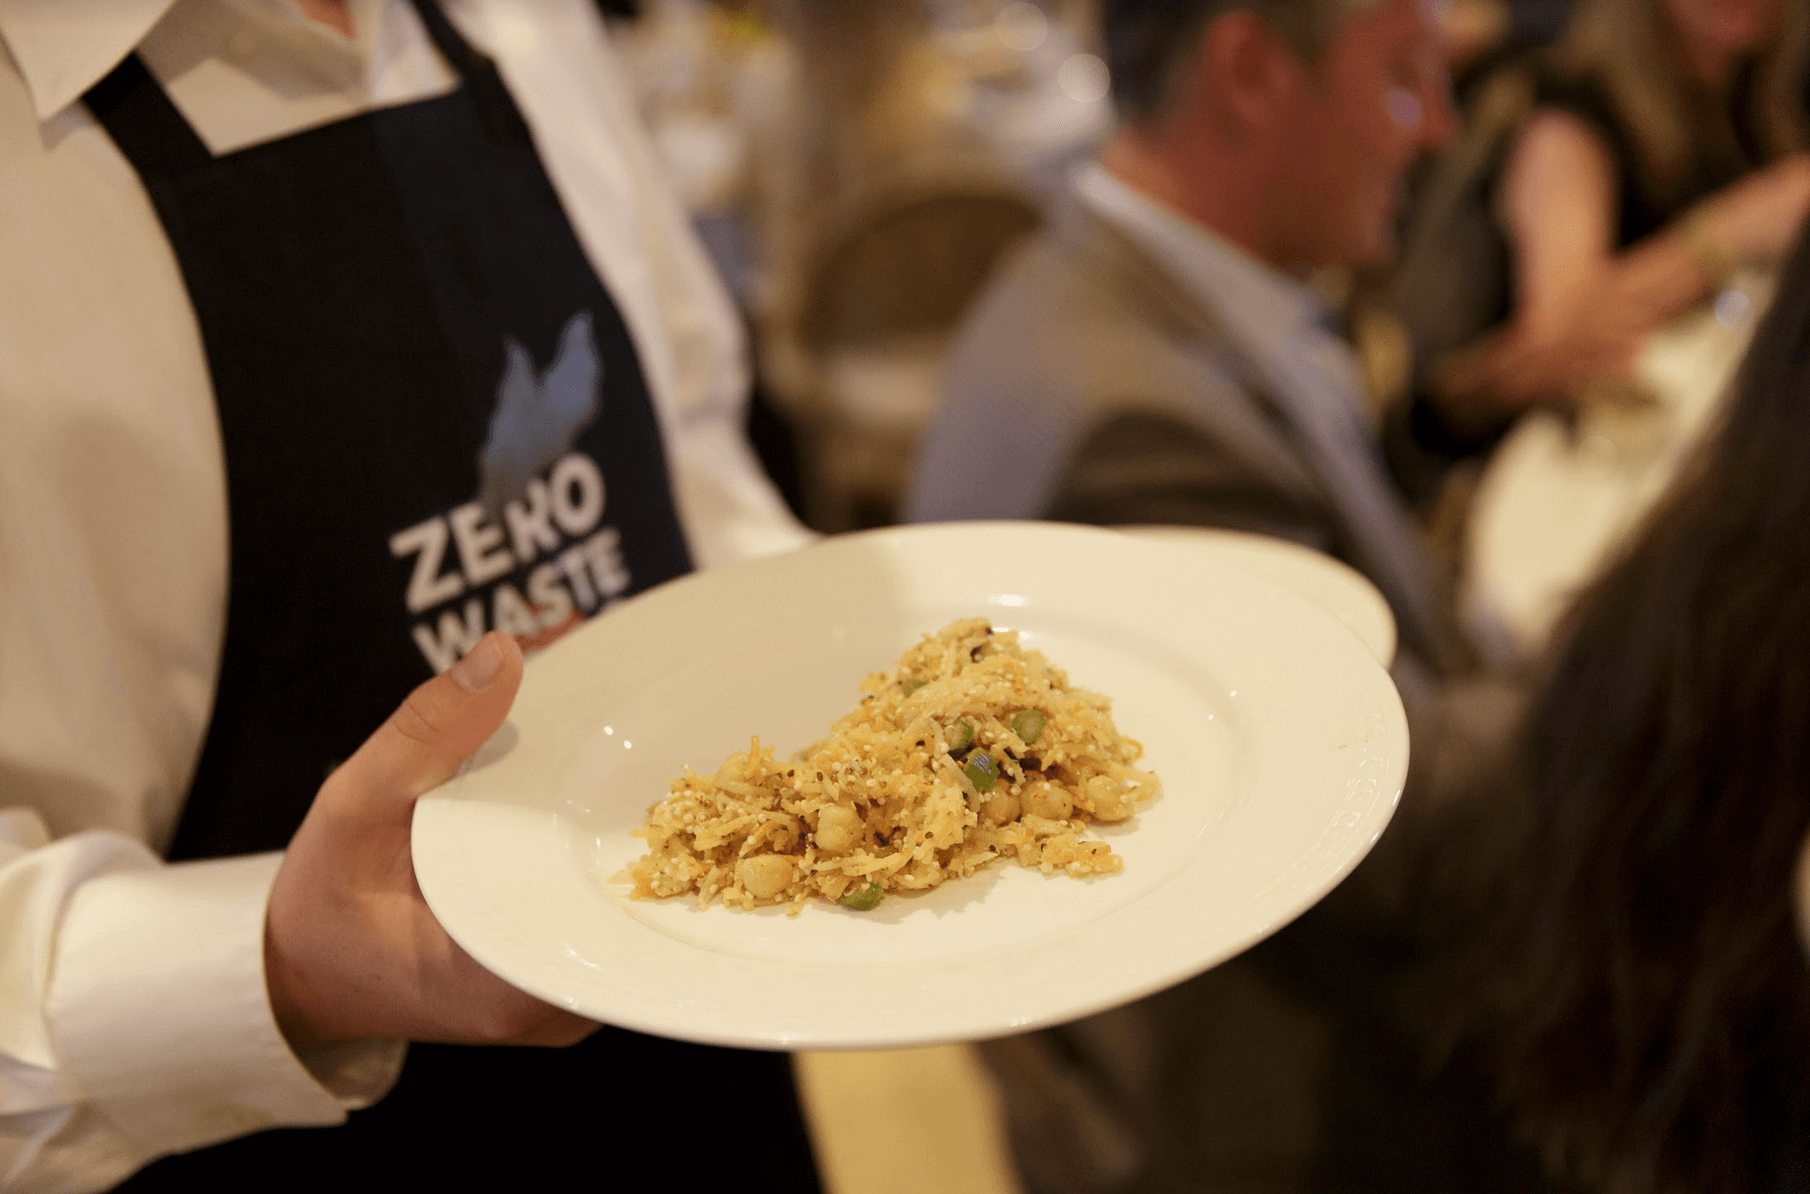 A zero-waste dinner featured local celebrity chefs preparing a meal that was 100% waste-free, with every component, from cookware to table centerpieces, either digestible or otherwise capable of being repurposed, April 26, 2018 Contributed photo